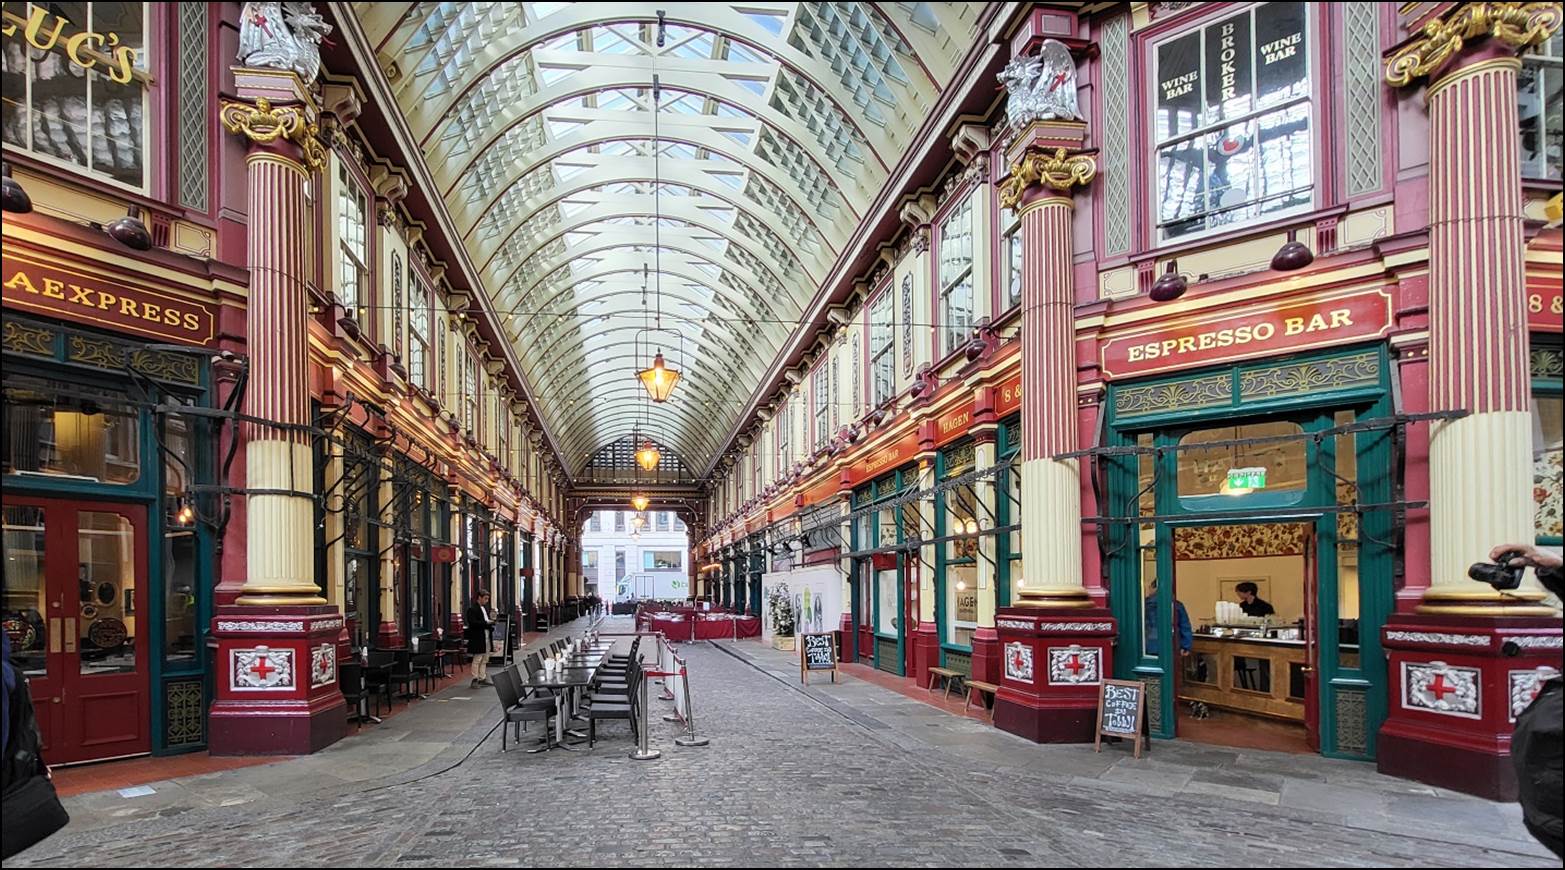 A large shopping mall with Leadenhall Market in the background

Description automatically generated with medium confidence